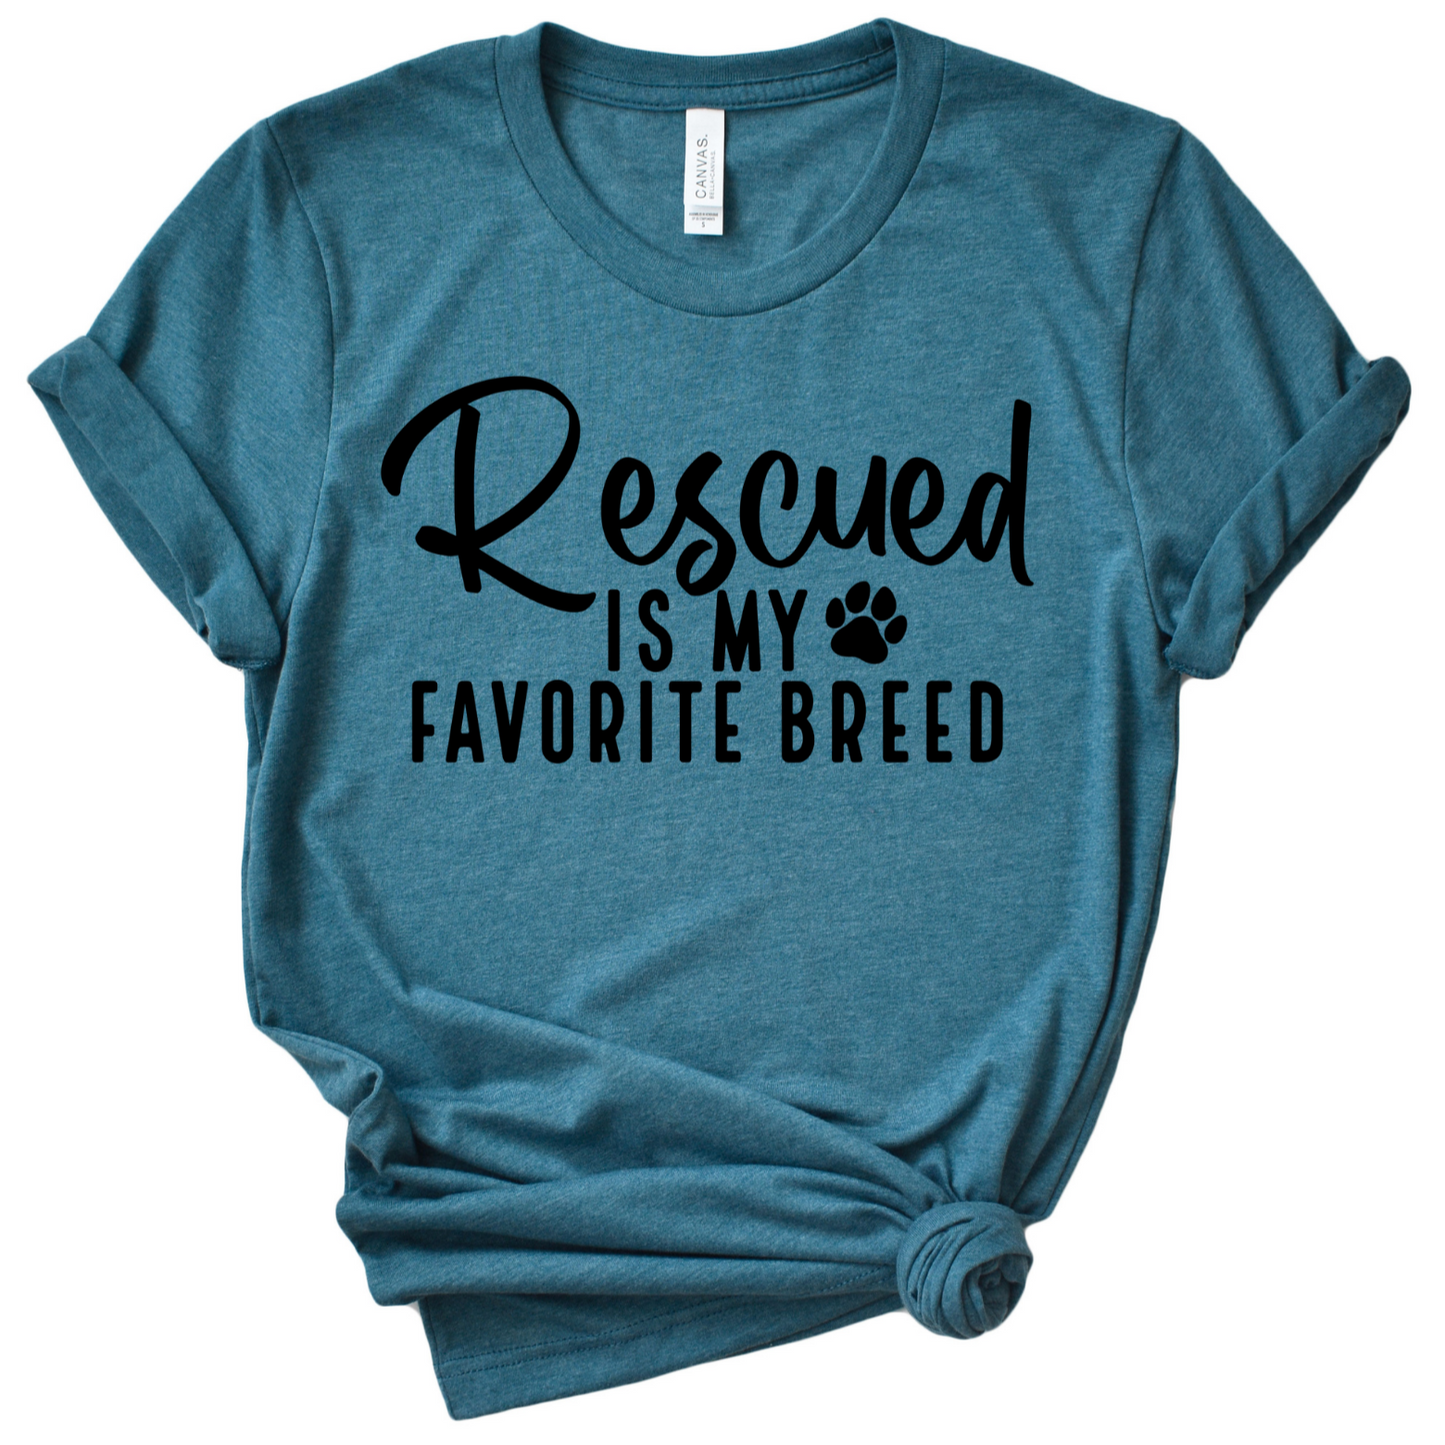 Rescued is My Favorite Breed